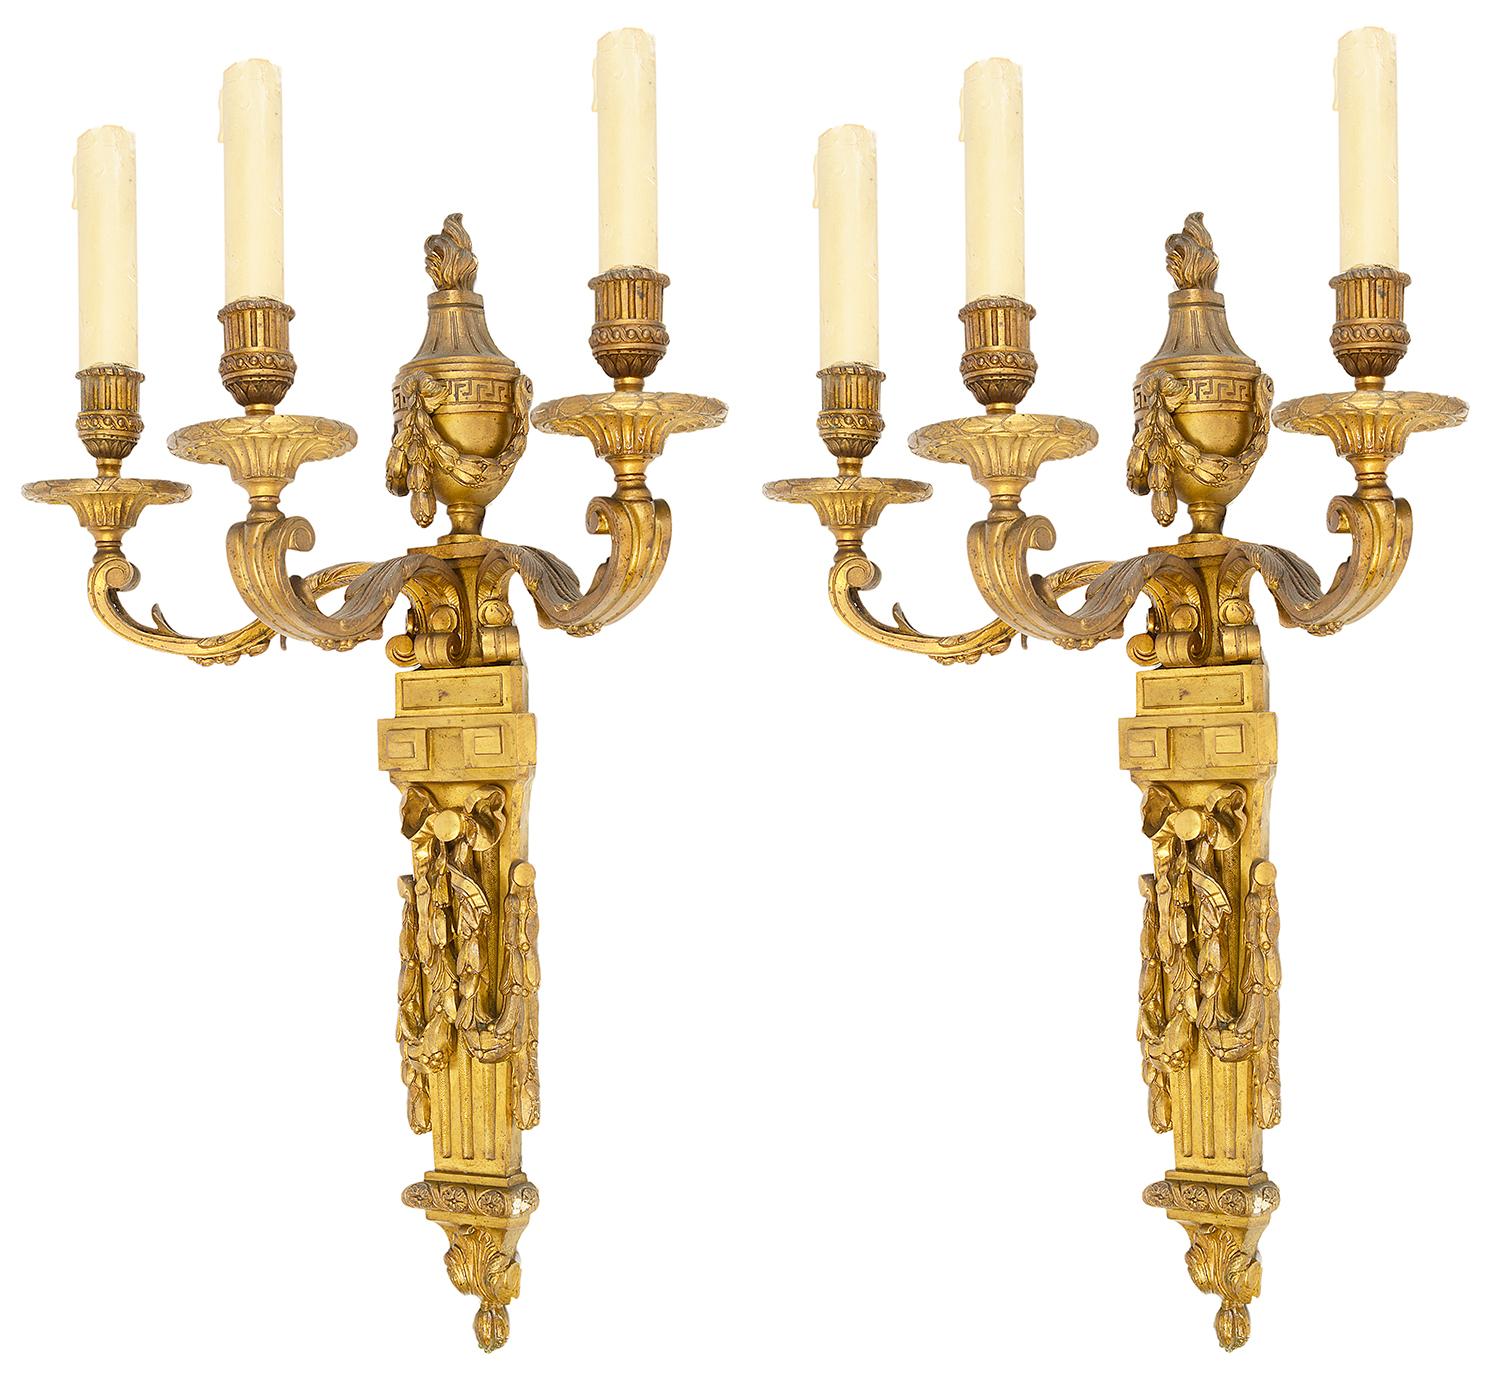 An impressive pair of 19th century gilded ormolu three branch wall sconces, each with flaming urns, ribbon and swag decoration over tapering fluted back plates.